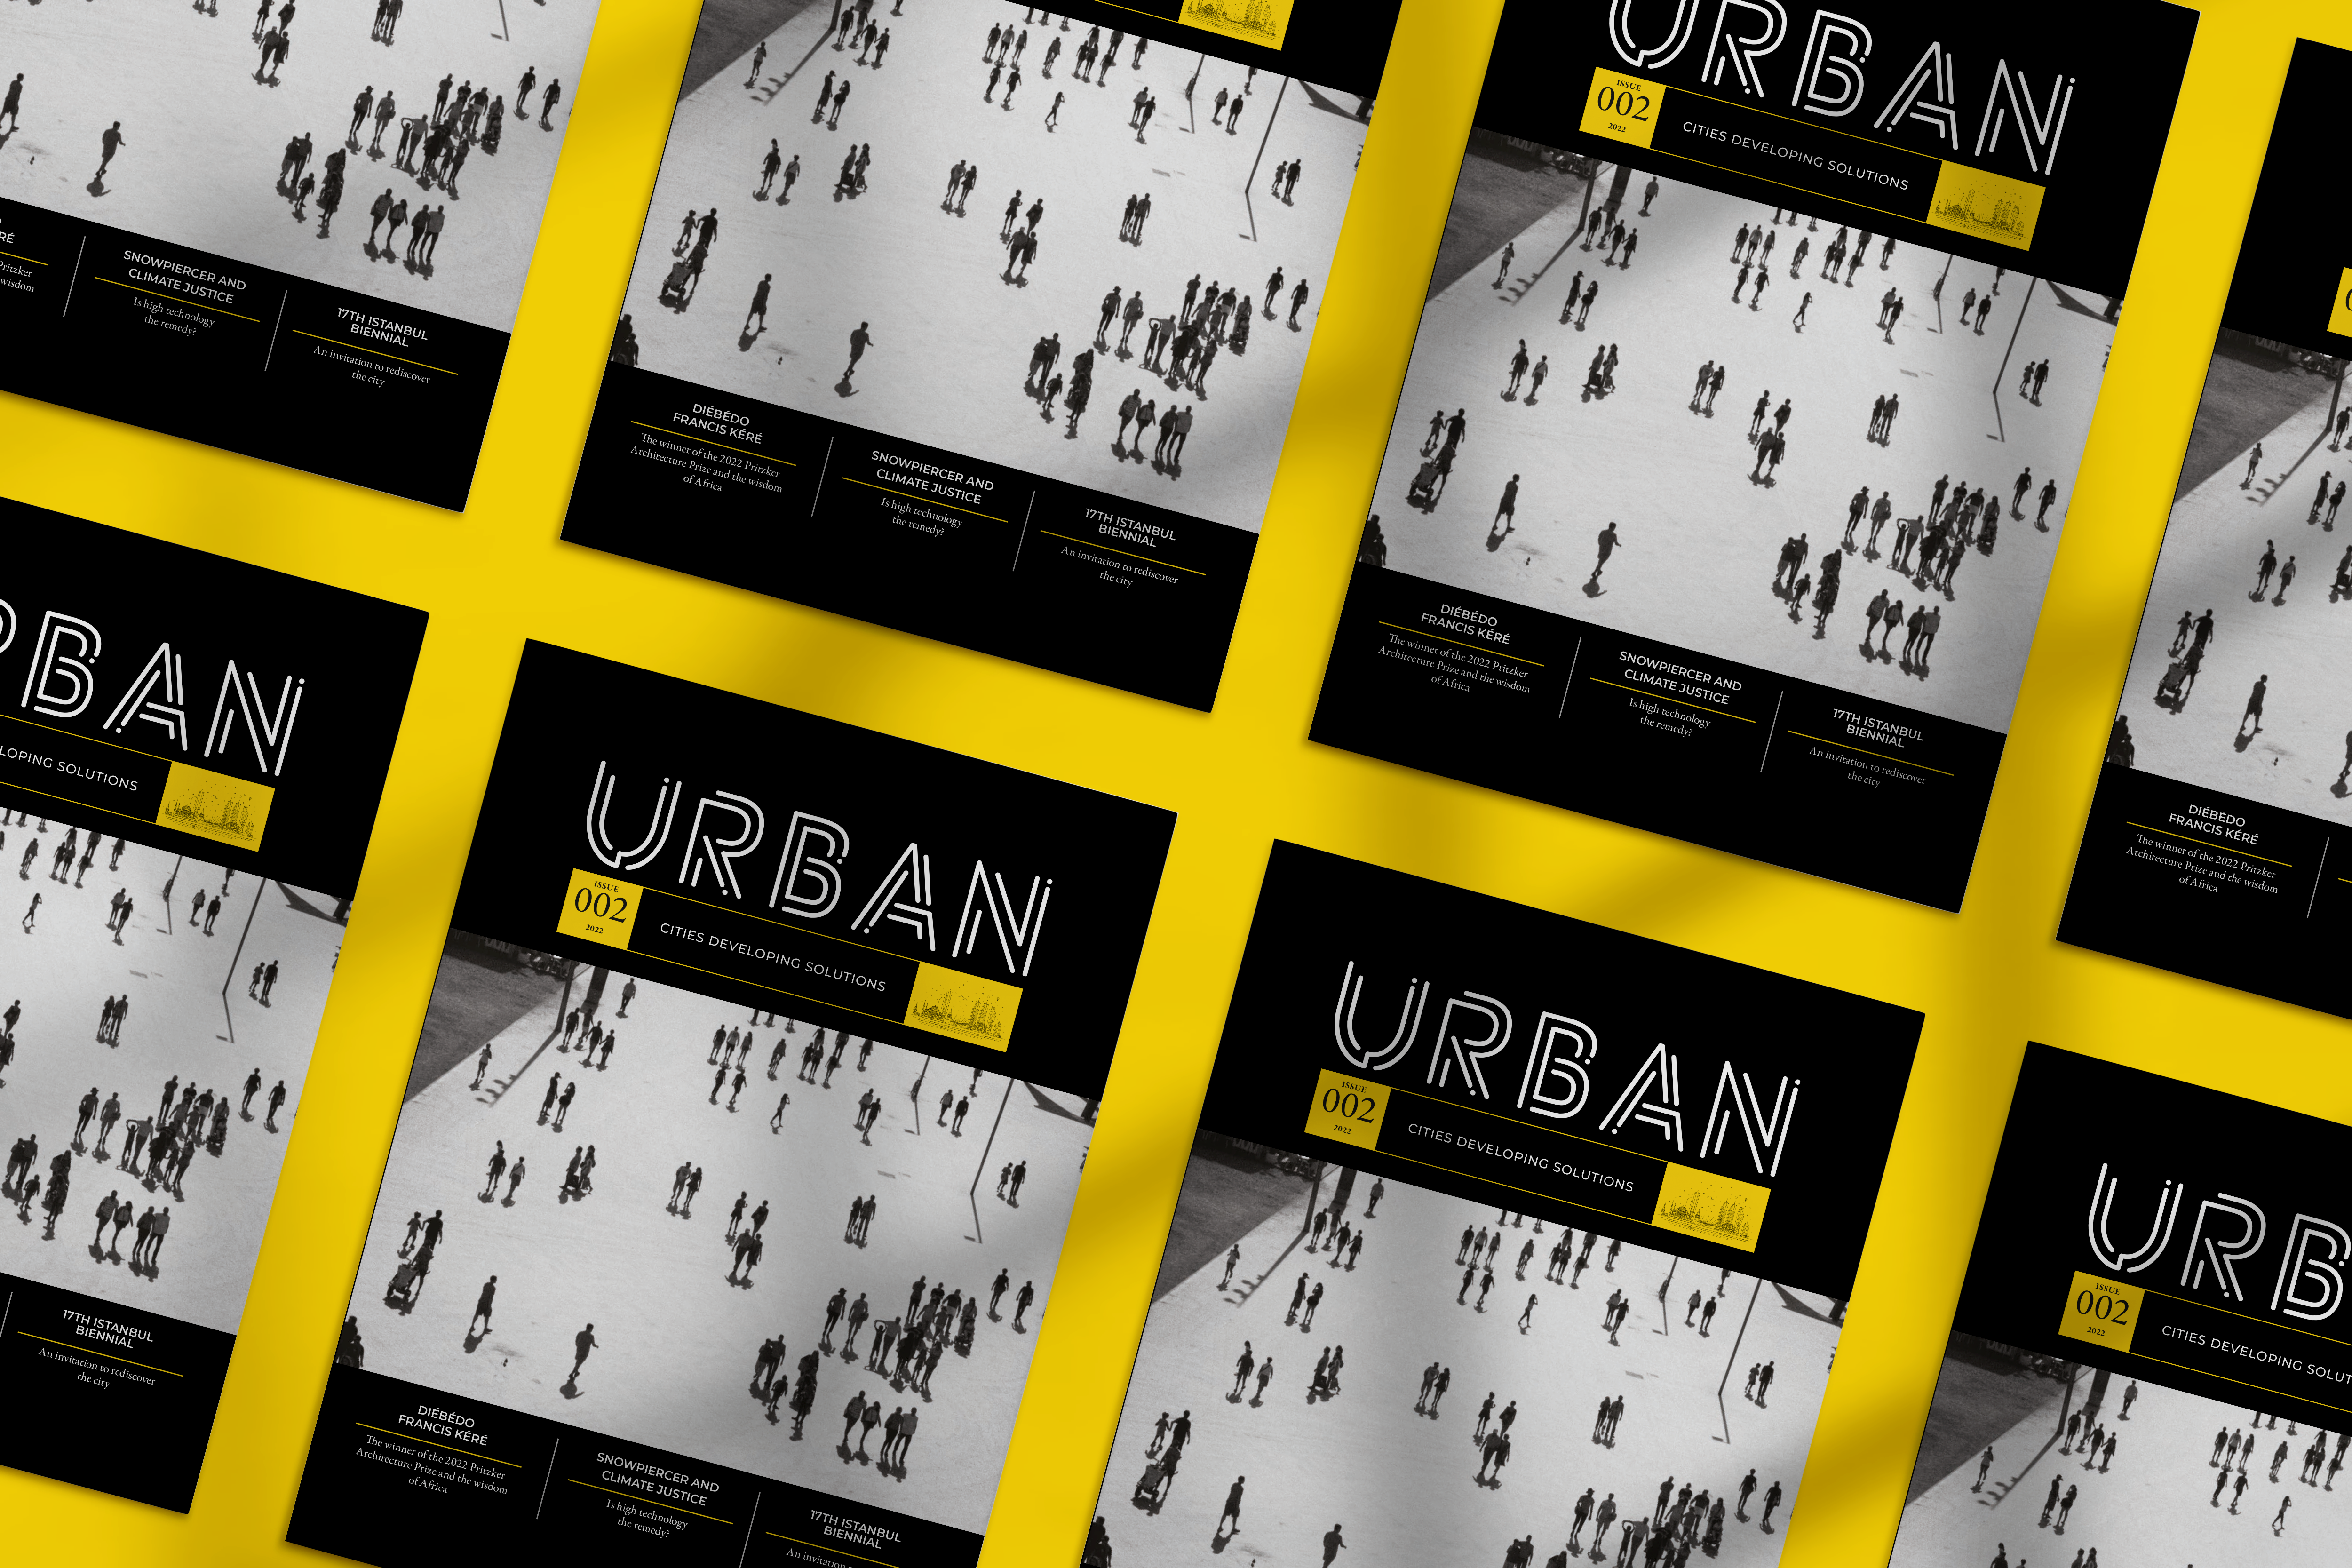 Latest Issue of Urban Magazine is Now Available}